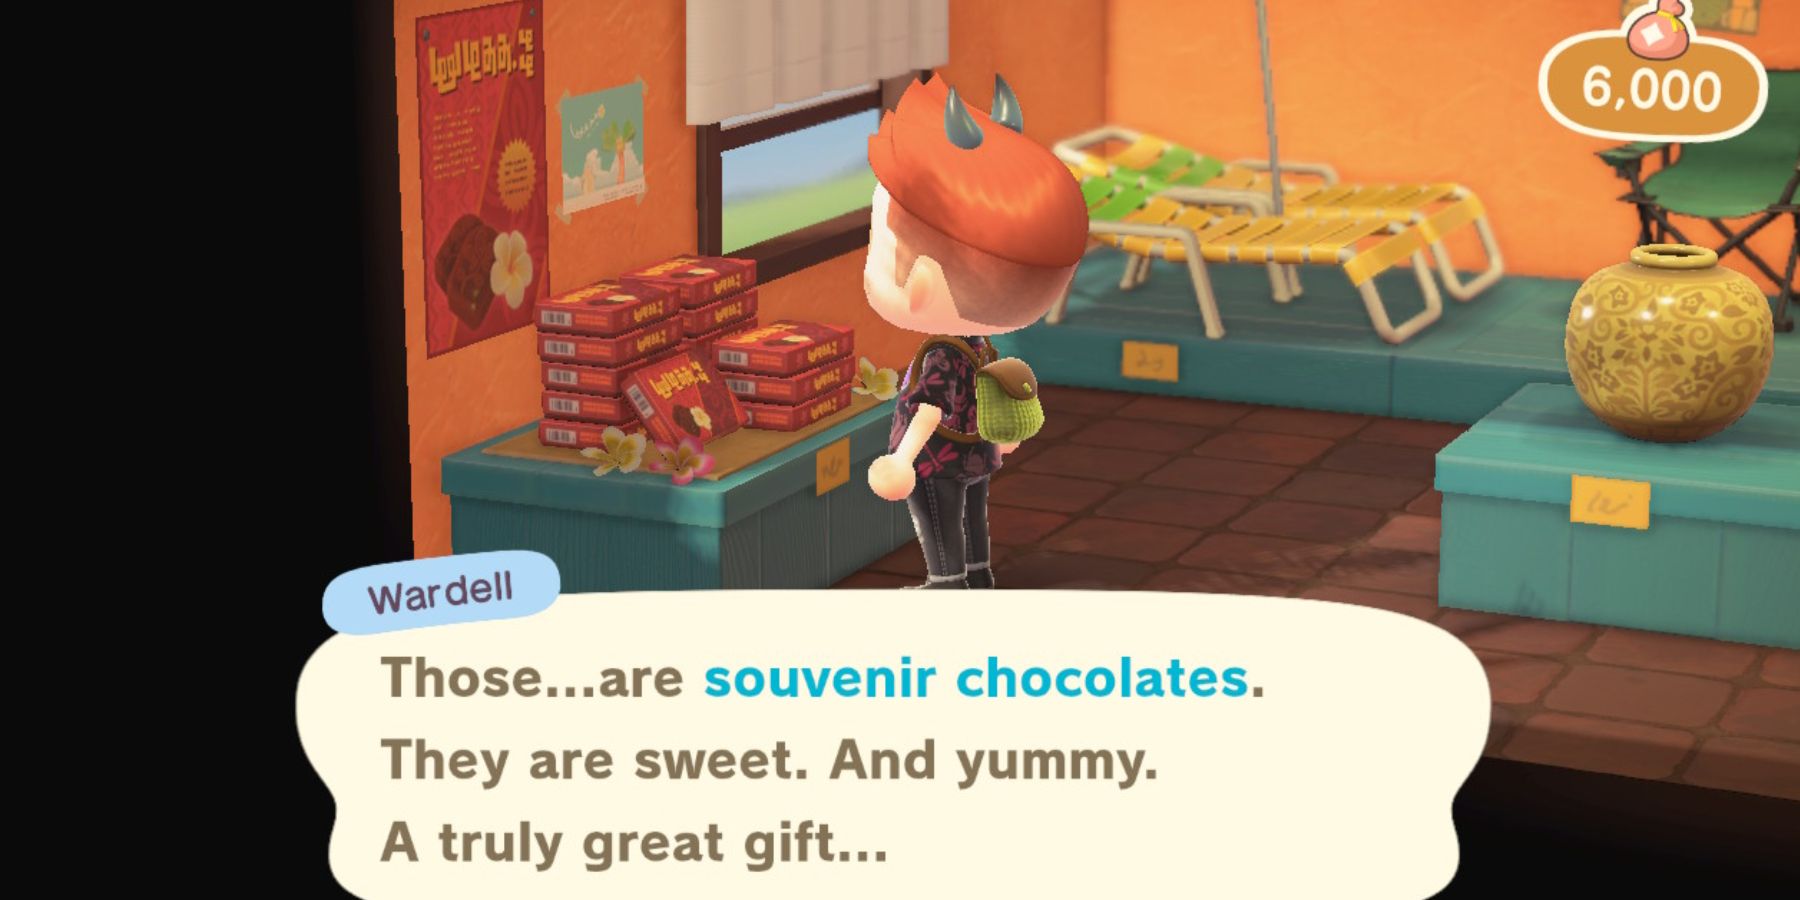 Souvenir chocolates can be brought back for island residents in Animal Crossing: New Horizons Happy Home Paradise DLC.